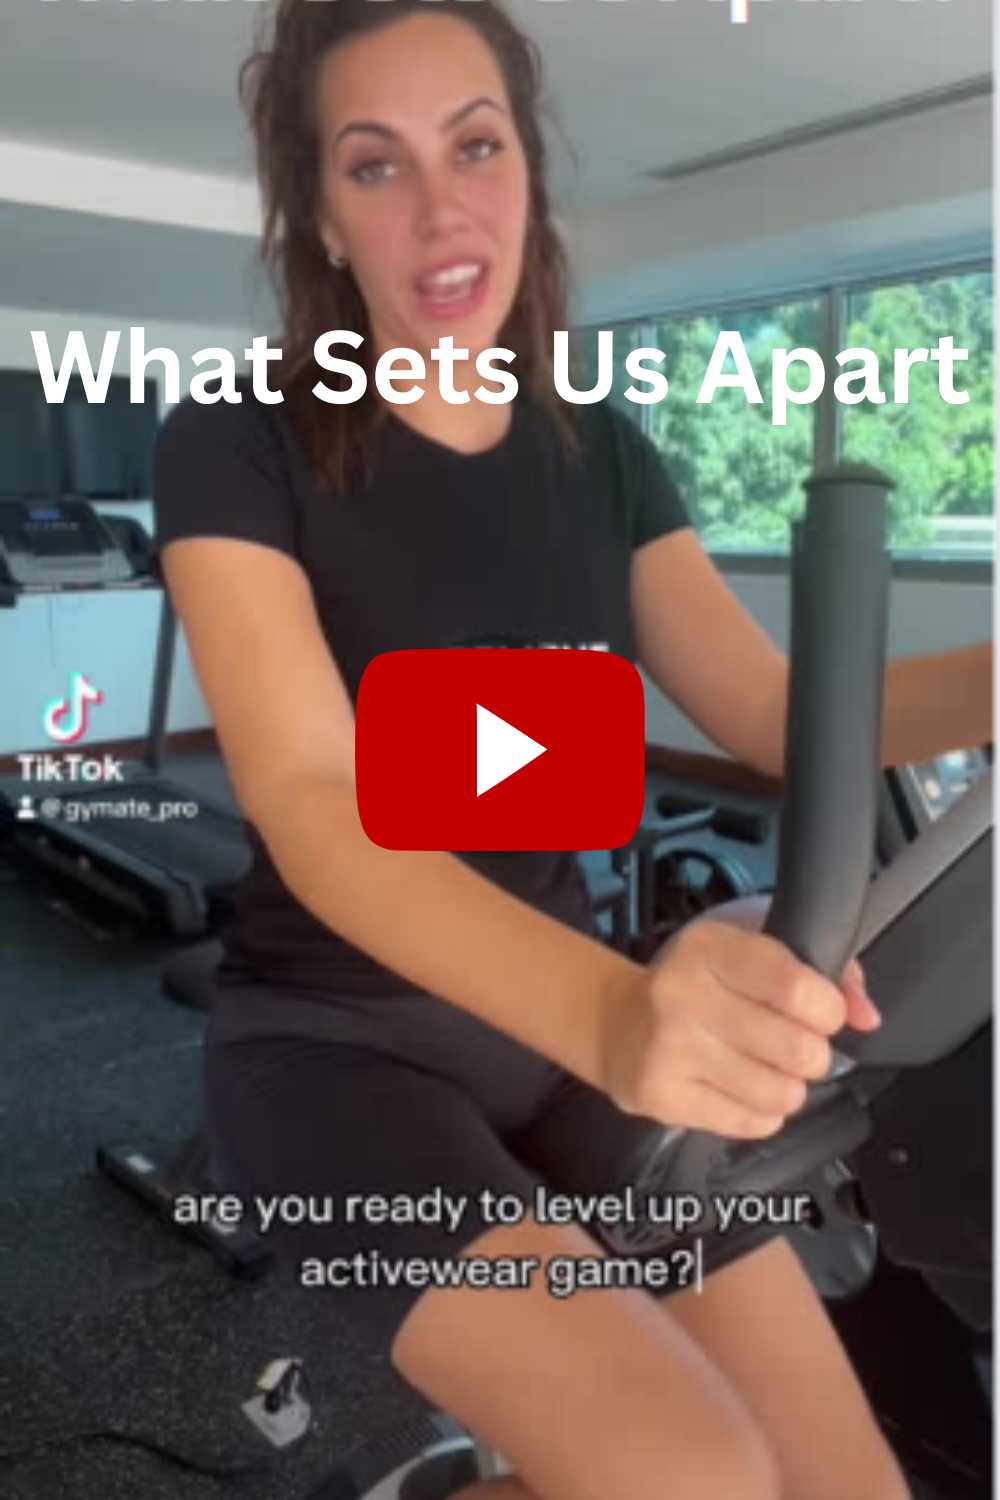 Gymate Pro Designer athleisure and activewear video - what sets us apart